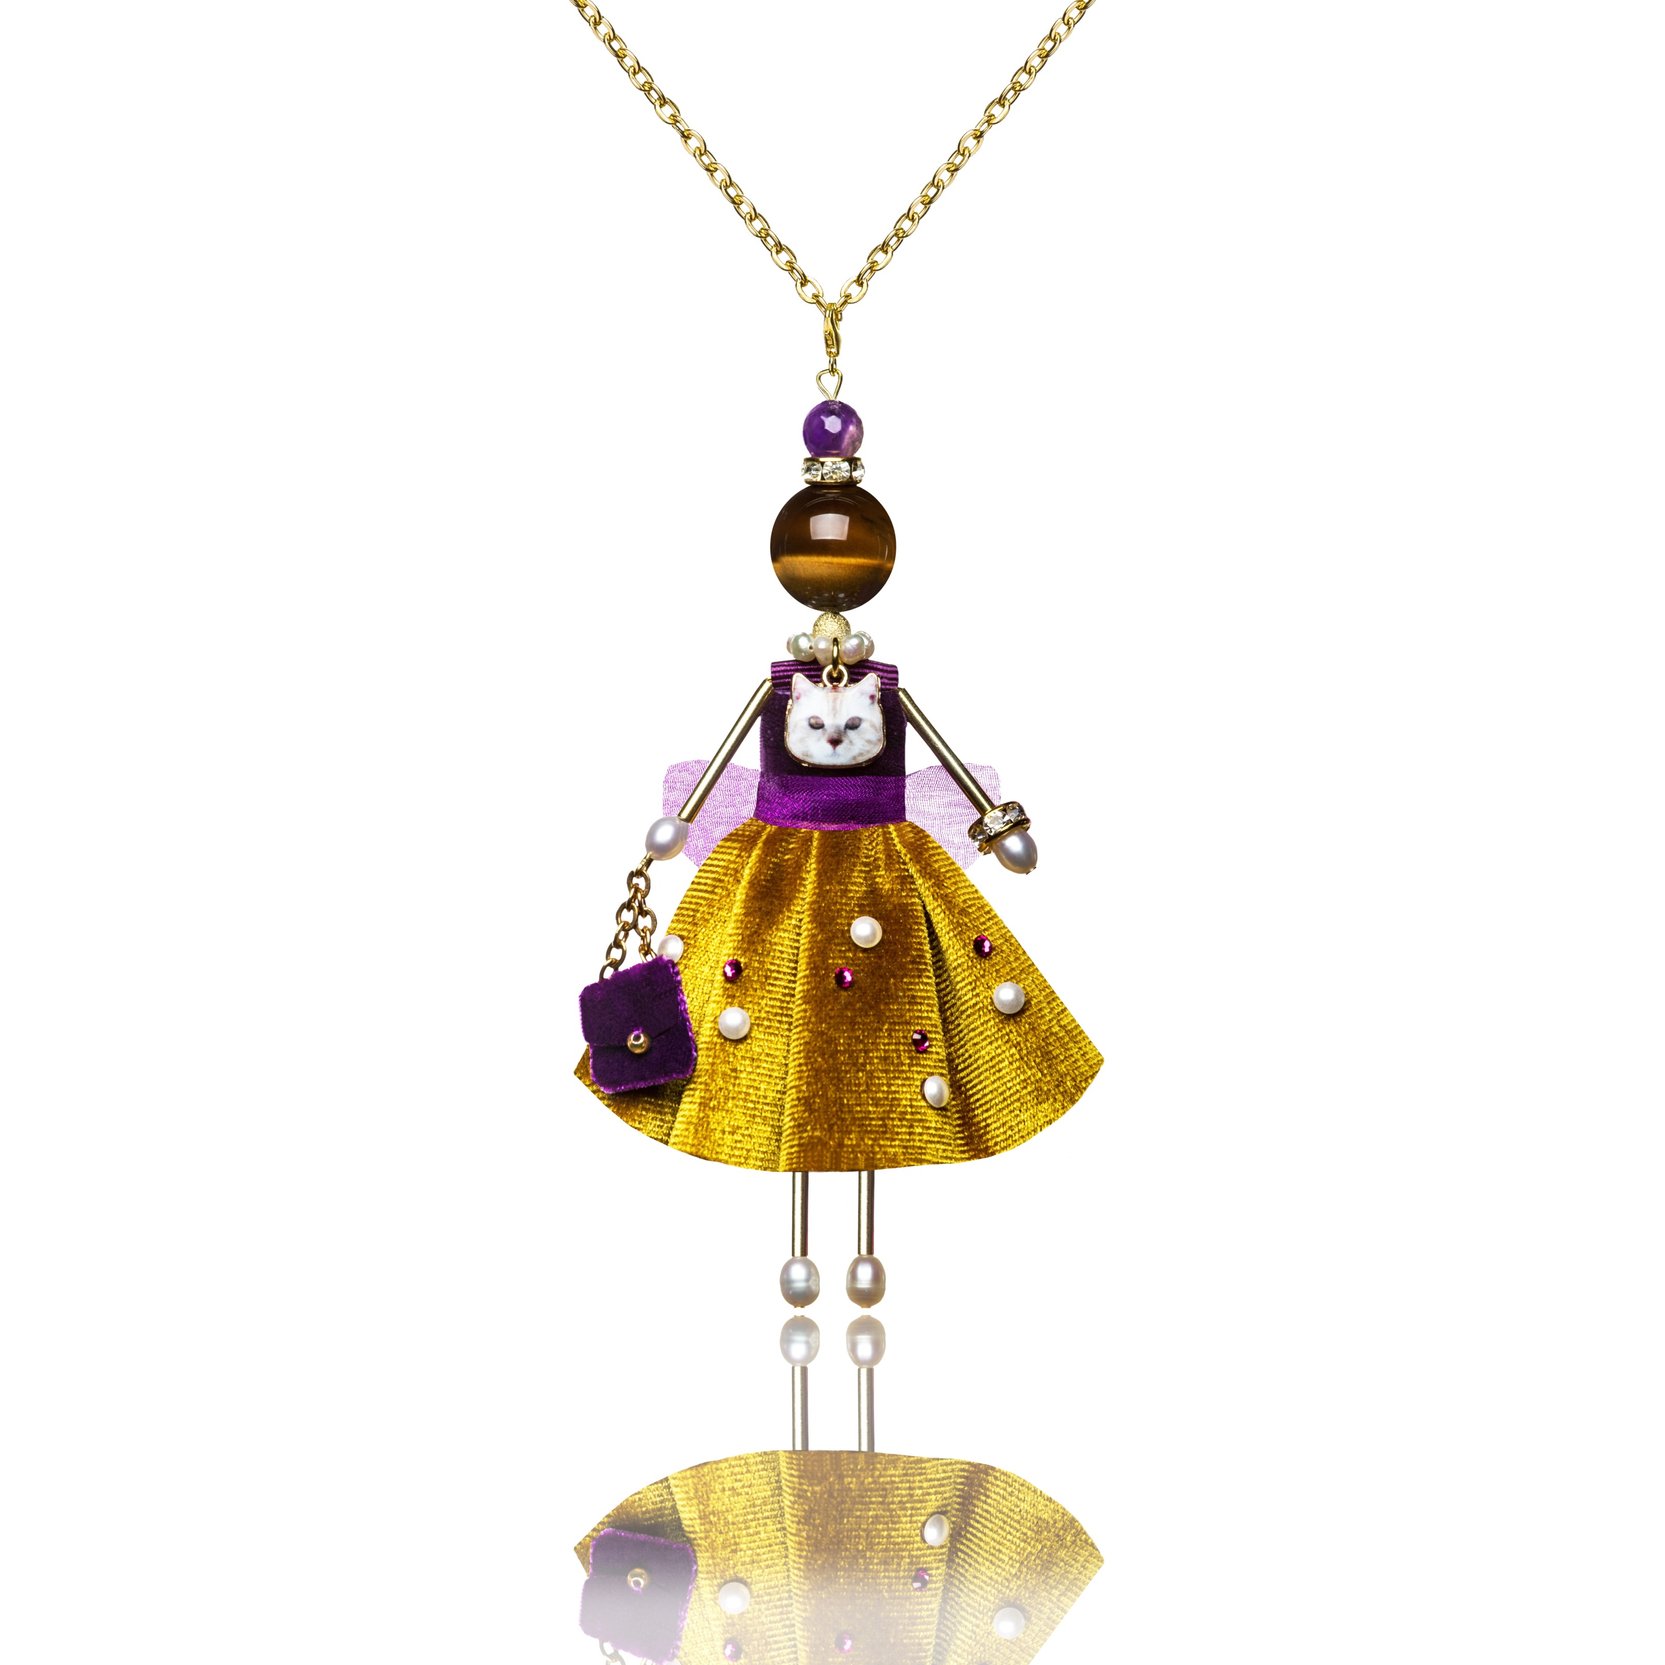 Doll-pendant of the collection "Six Cats"